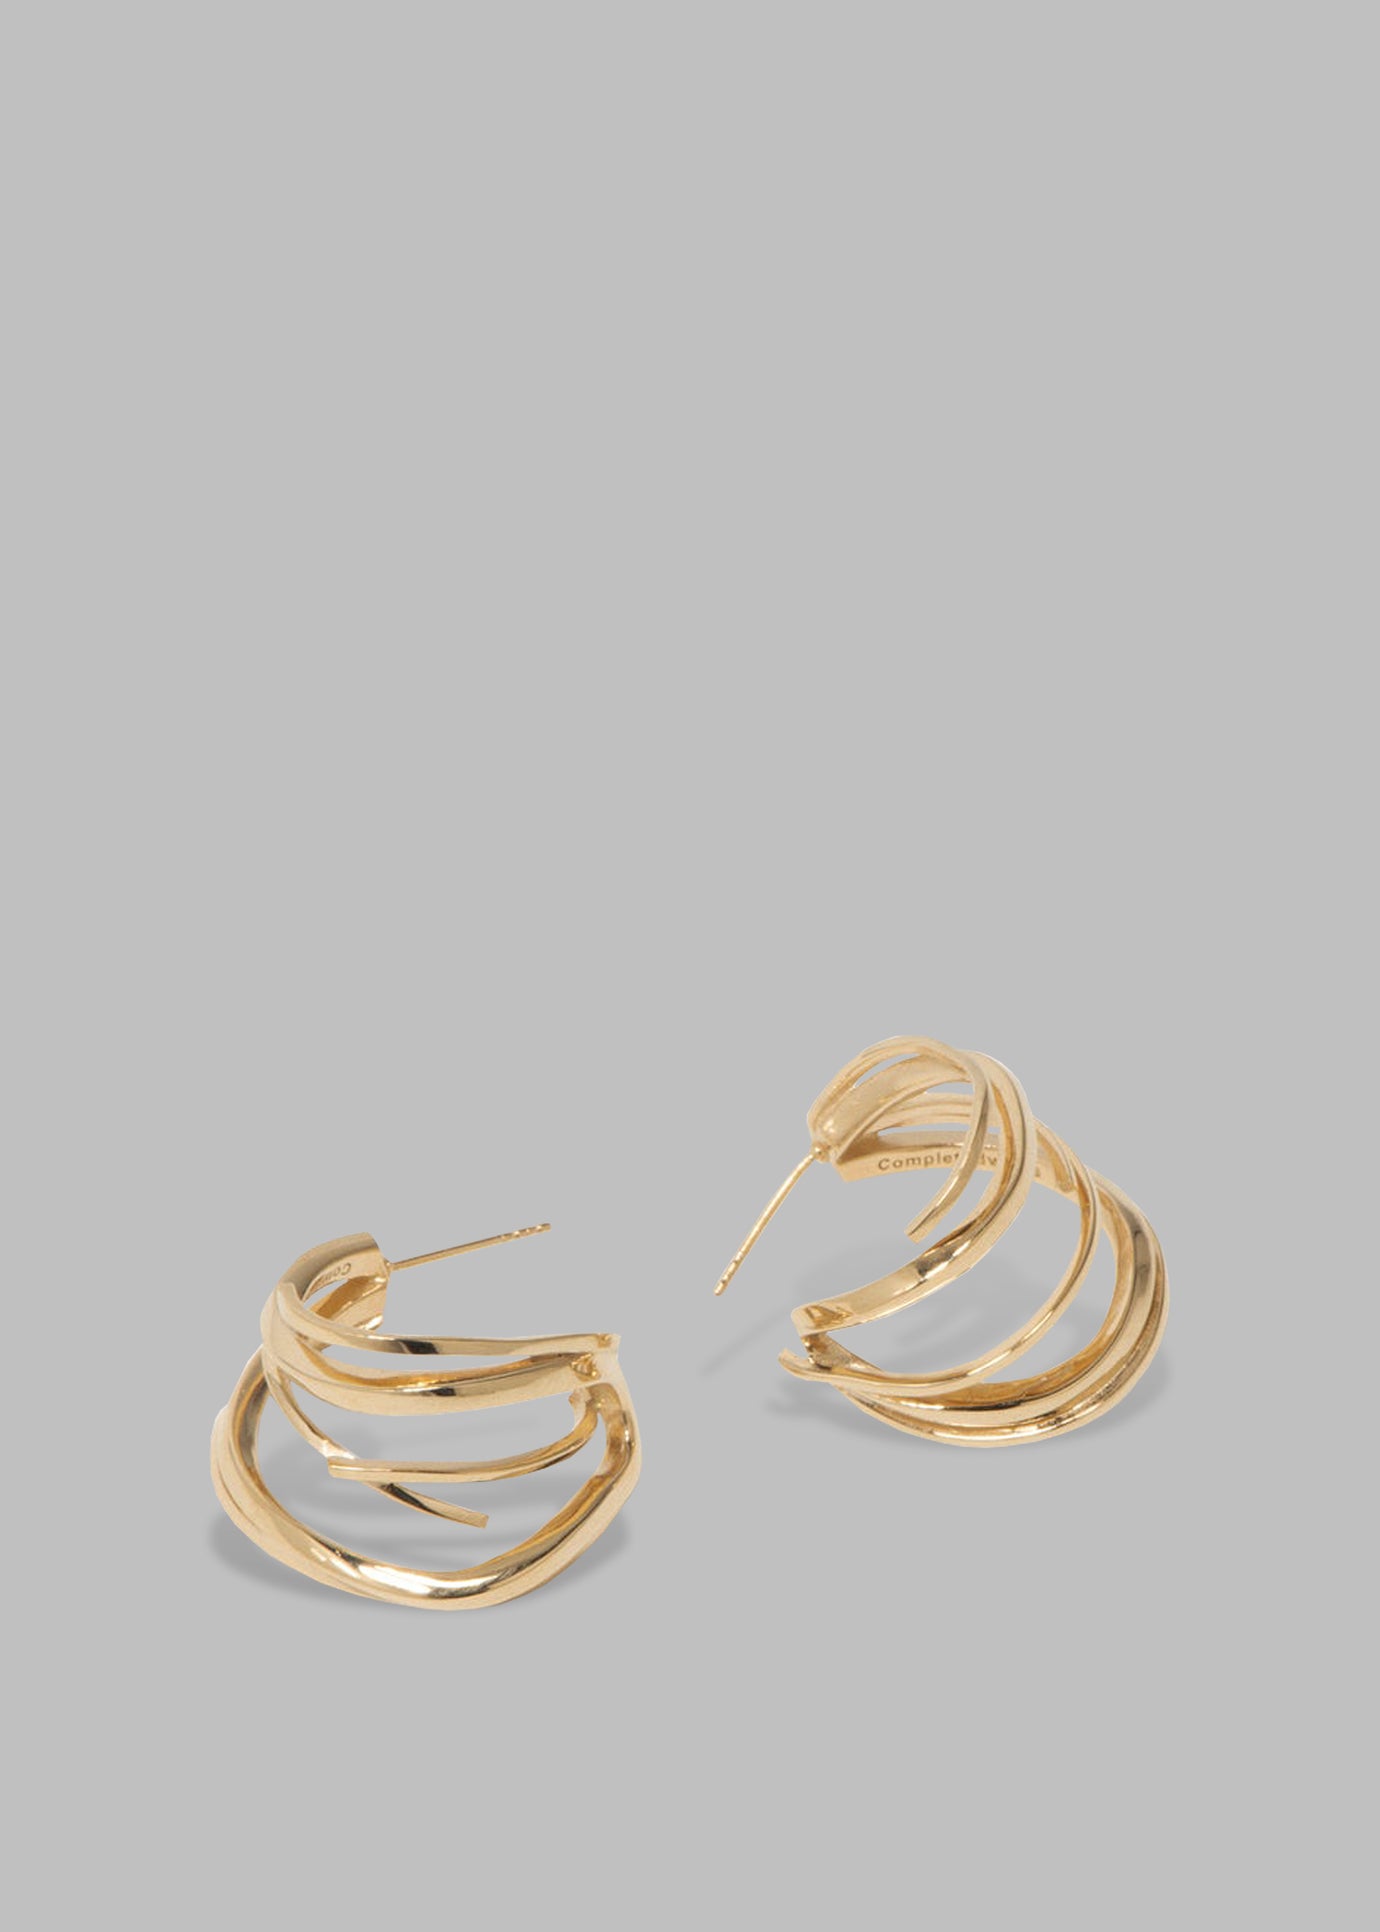 Completedworks C31 Earrings - Gold